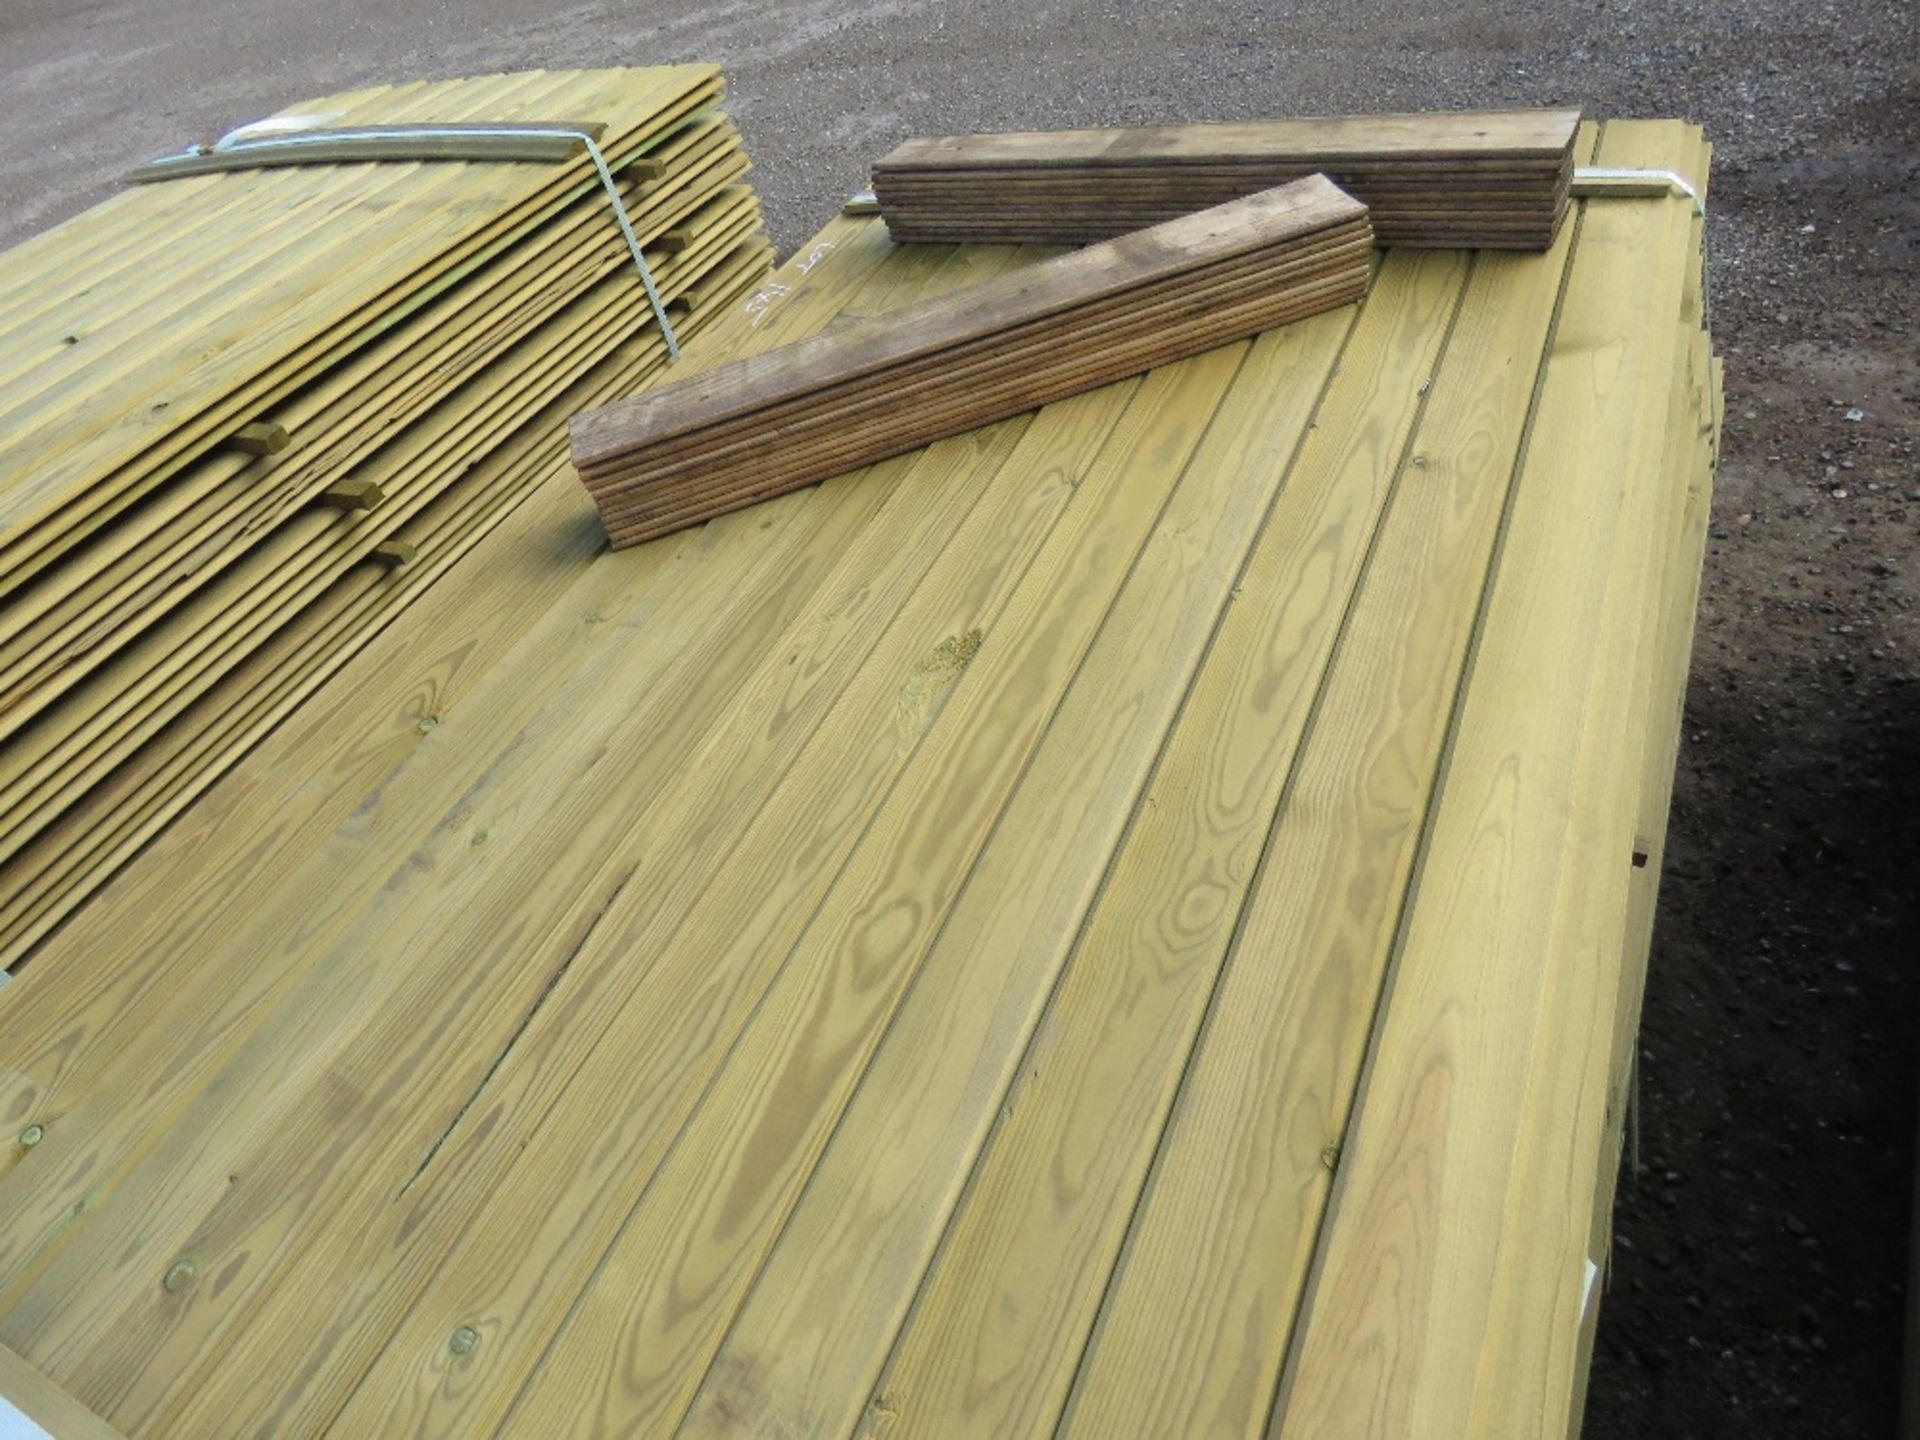 SMALLER PACK OF 1.72M APPROX SHIPLAP CLADDING TIMBER X 9.5CM WIDTH. - Image 2 of 3